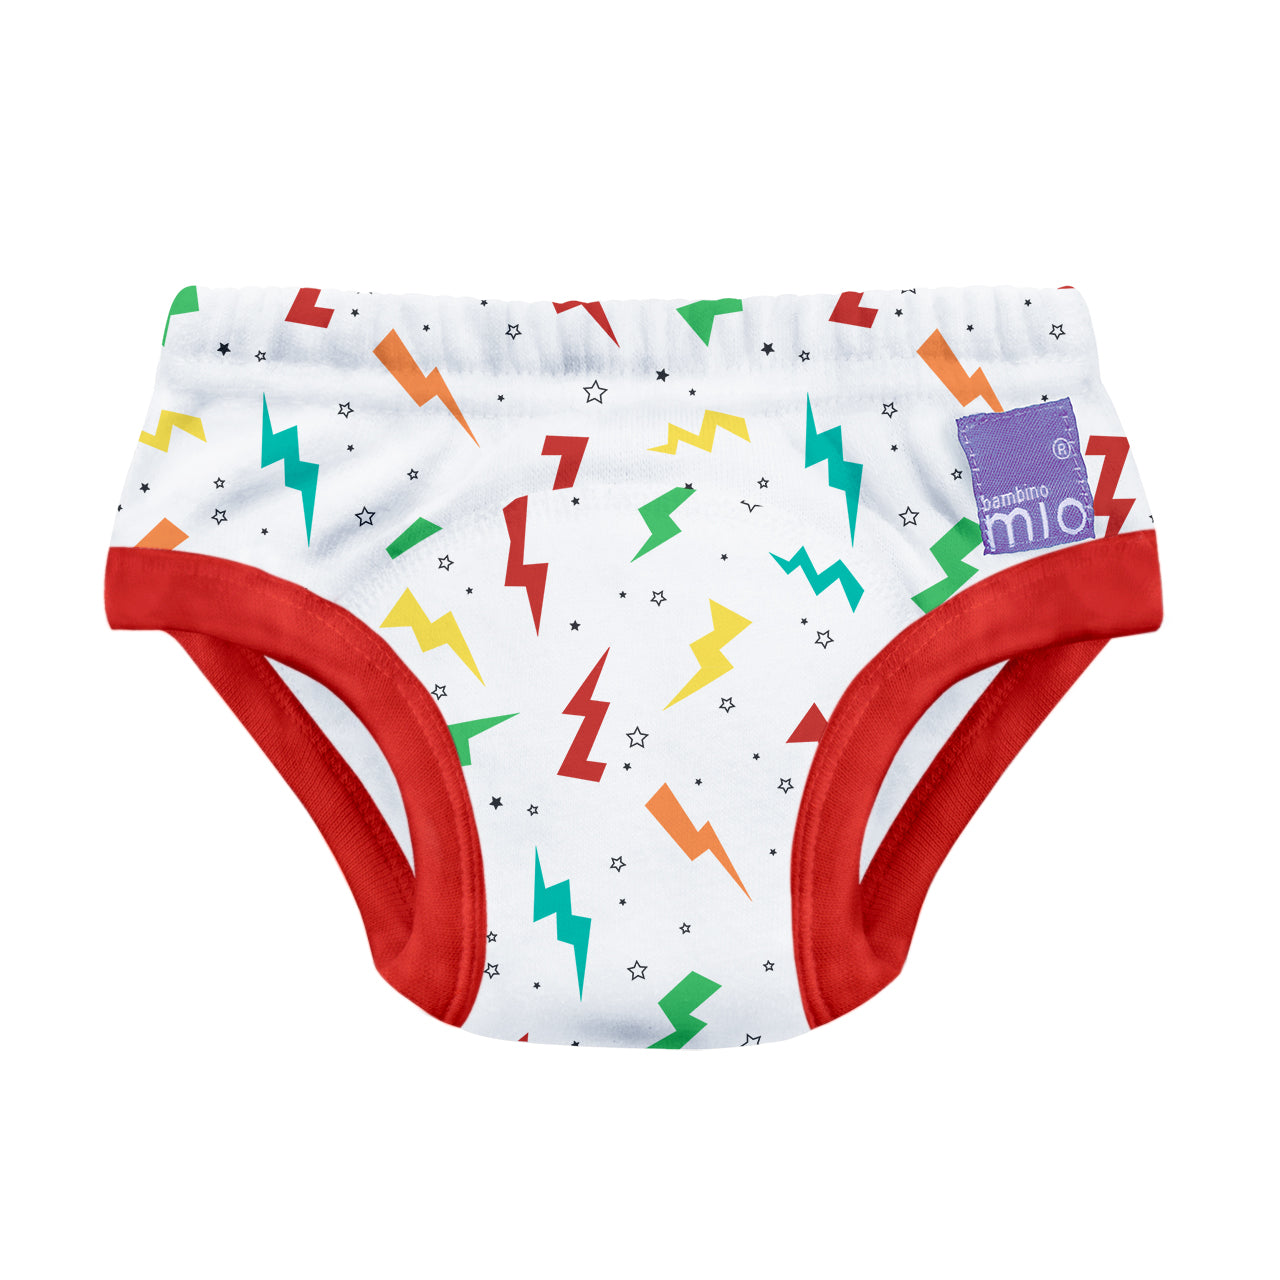 Bambino mio, Potty training underwear for girls and boys, 18-24 months